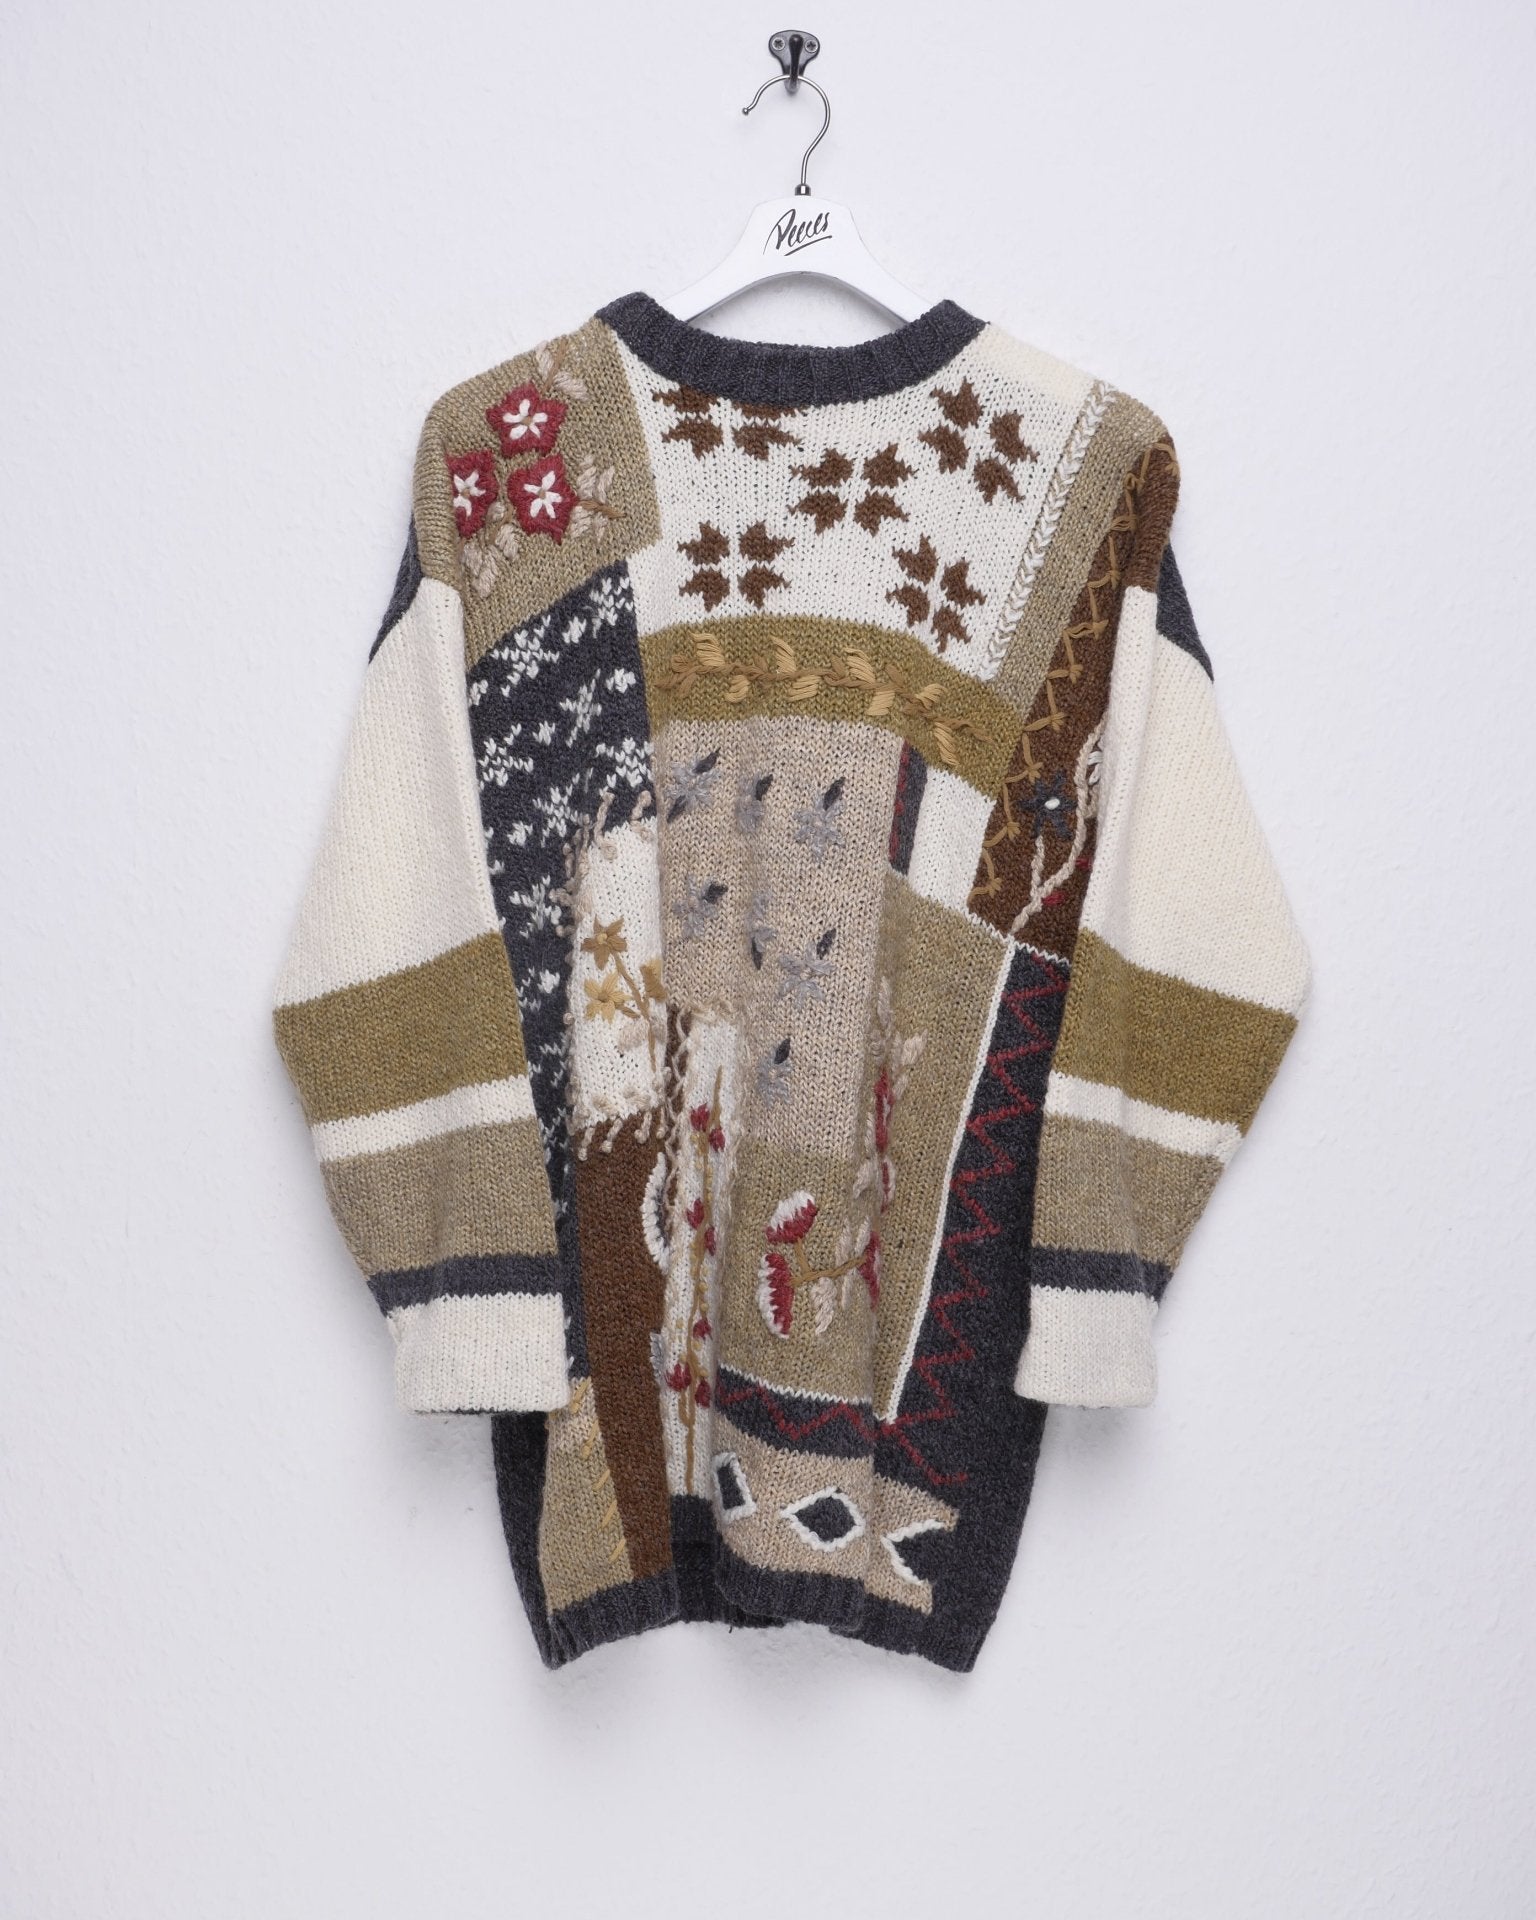 knitted patterned Vintage Sweater - Peeces